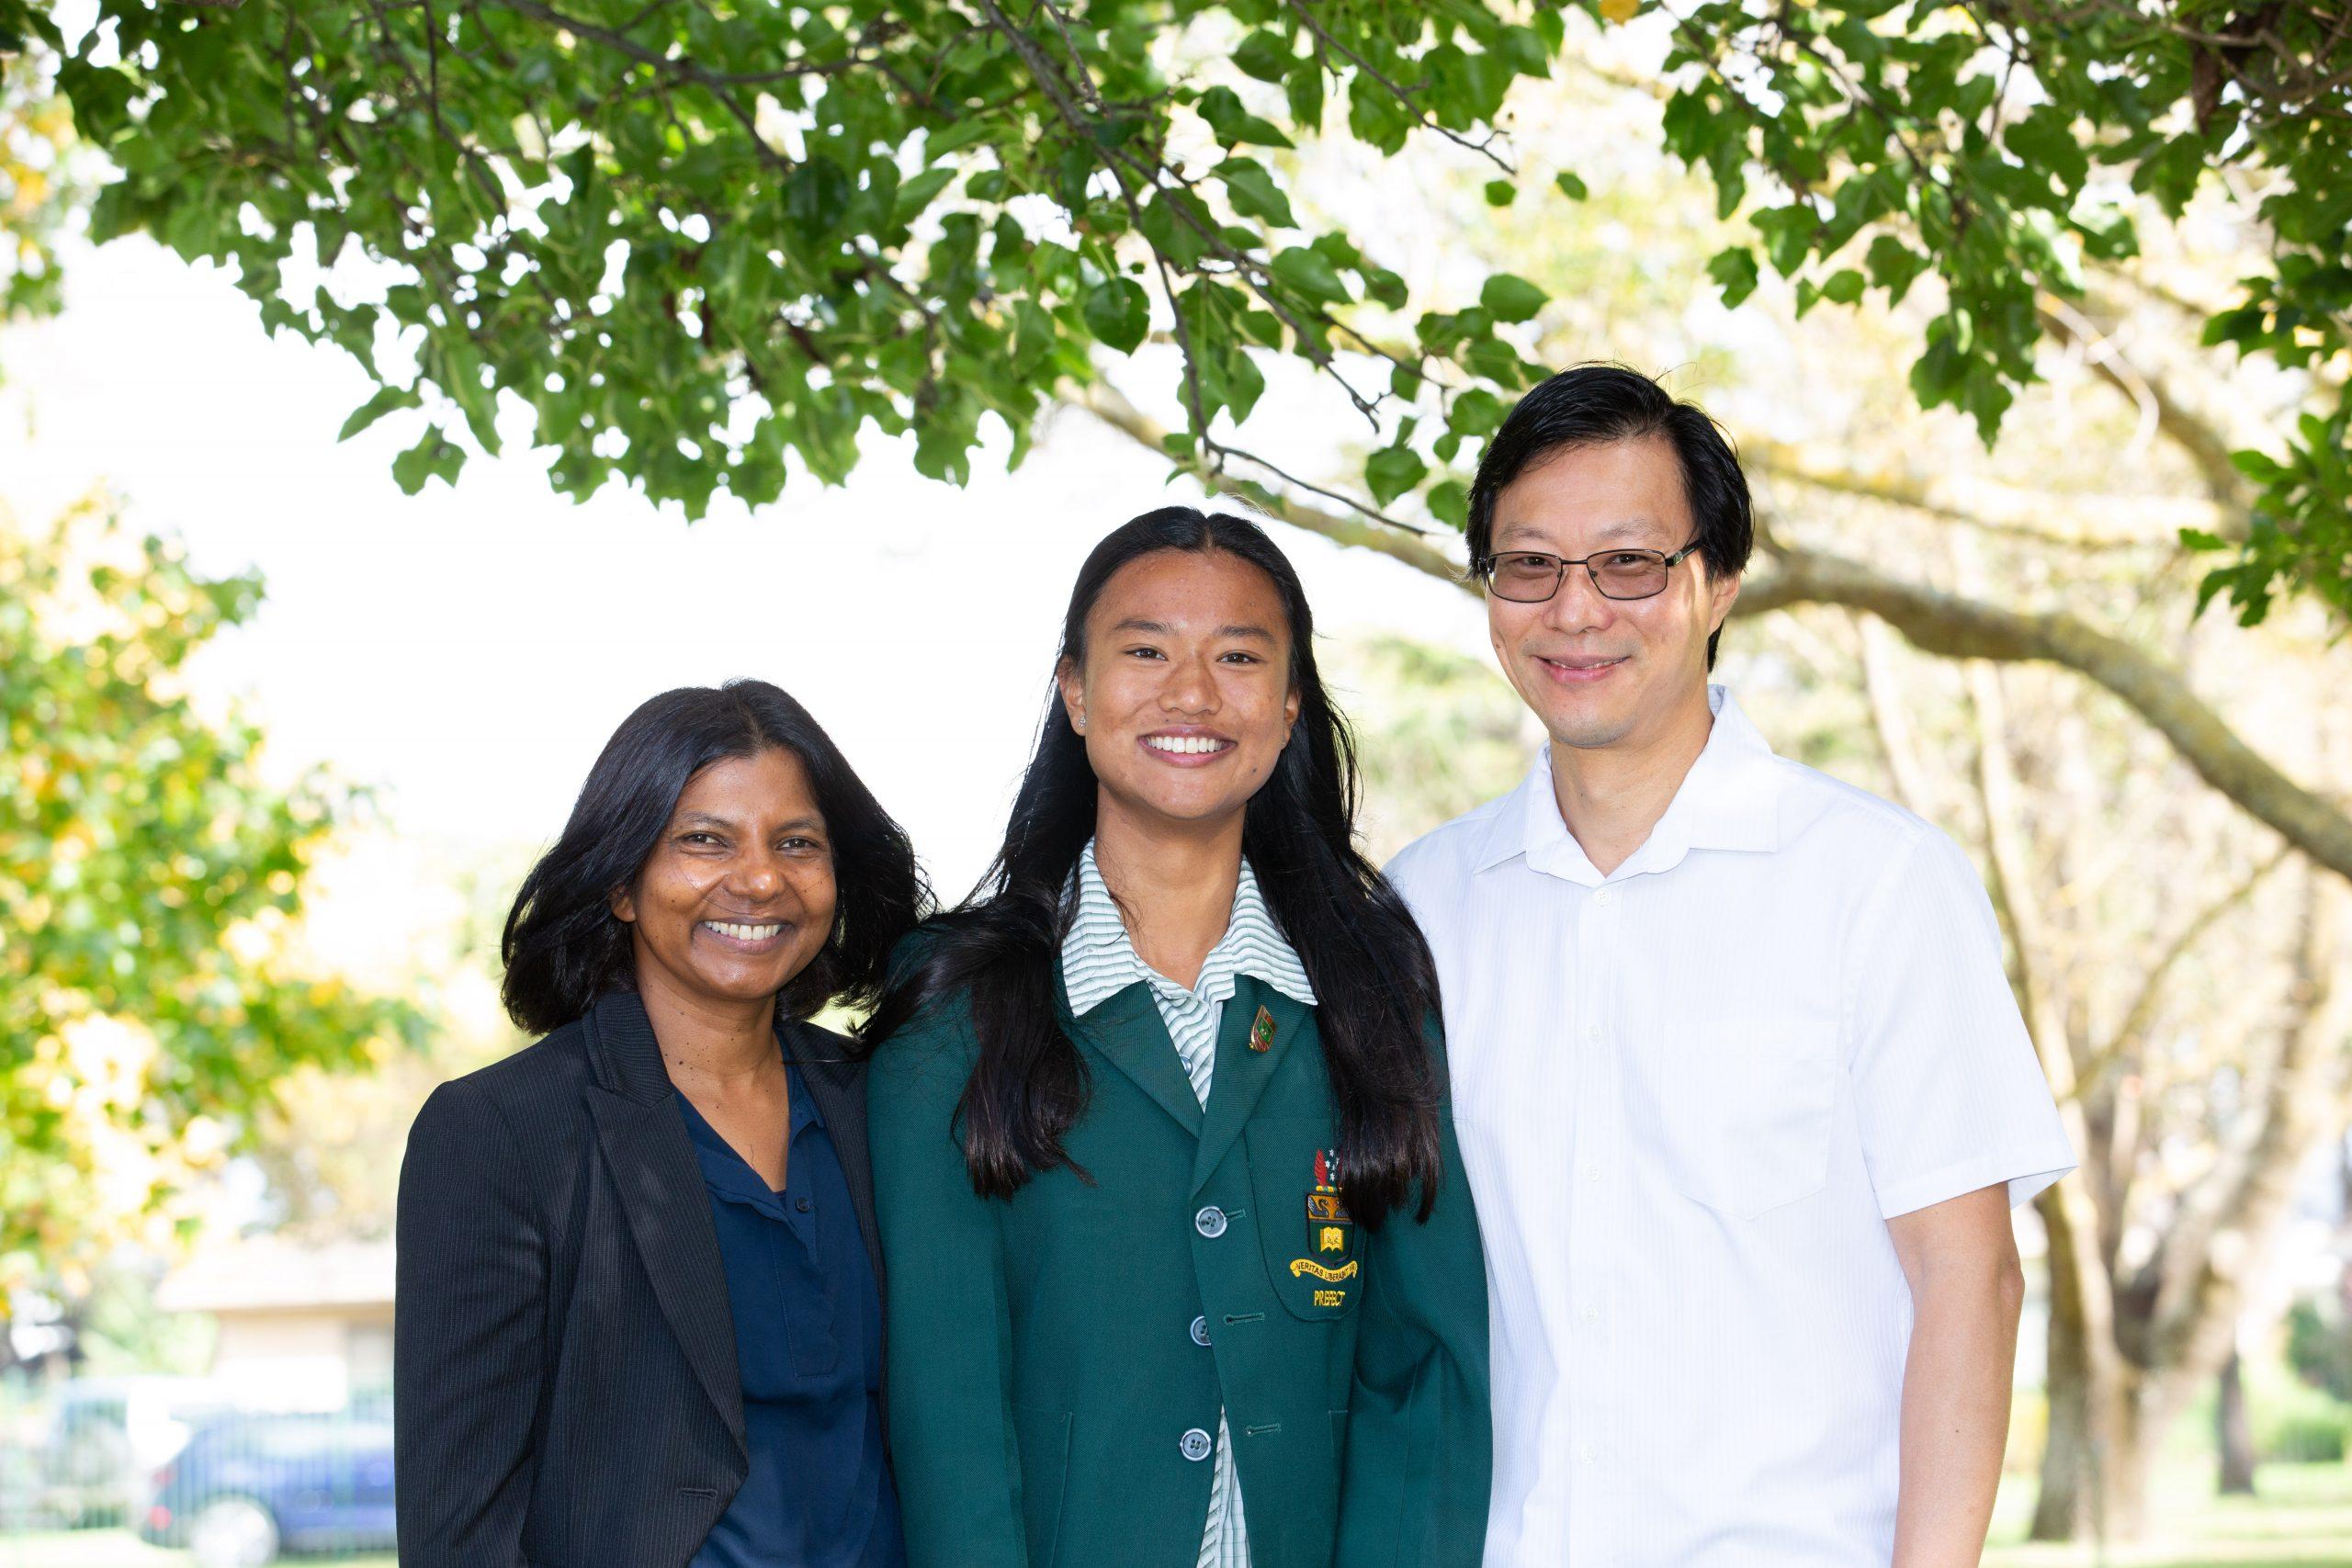 Gippsland Grammar’s 2022 DUX is Sarah Husodo with an ATAR of 98.55. Sarah is pictured with her parents Jemima and Oscar.